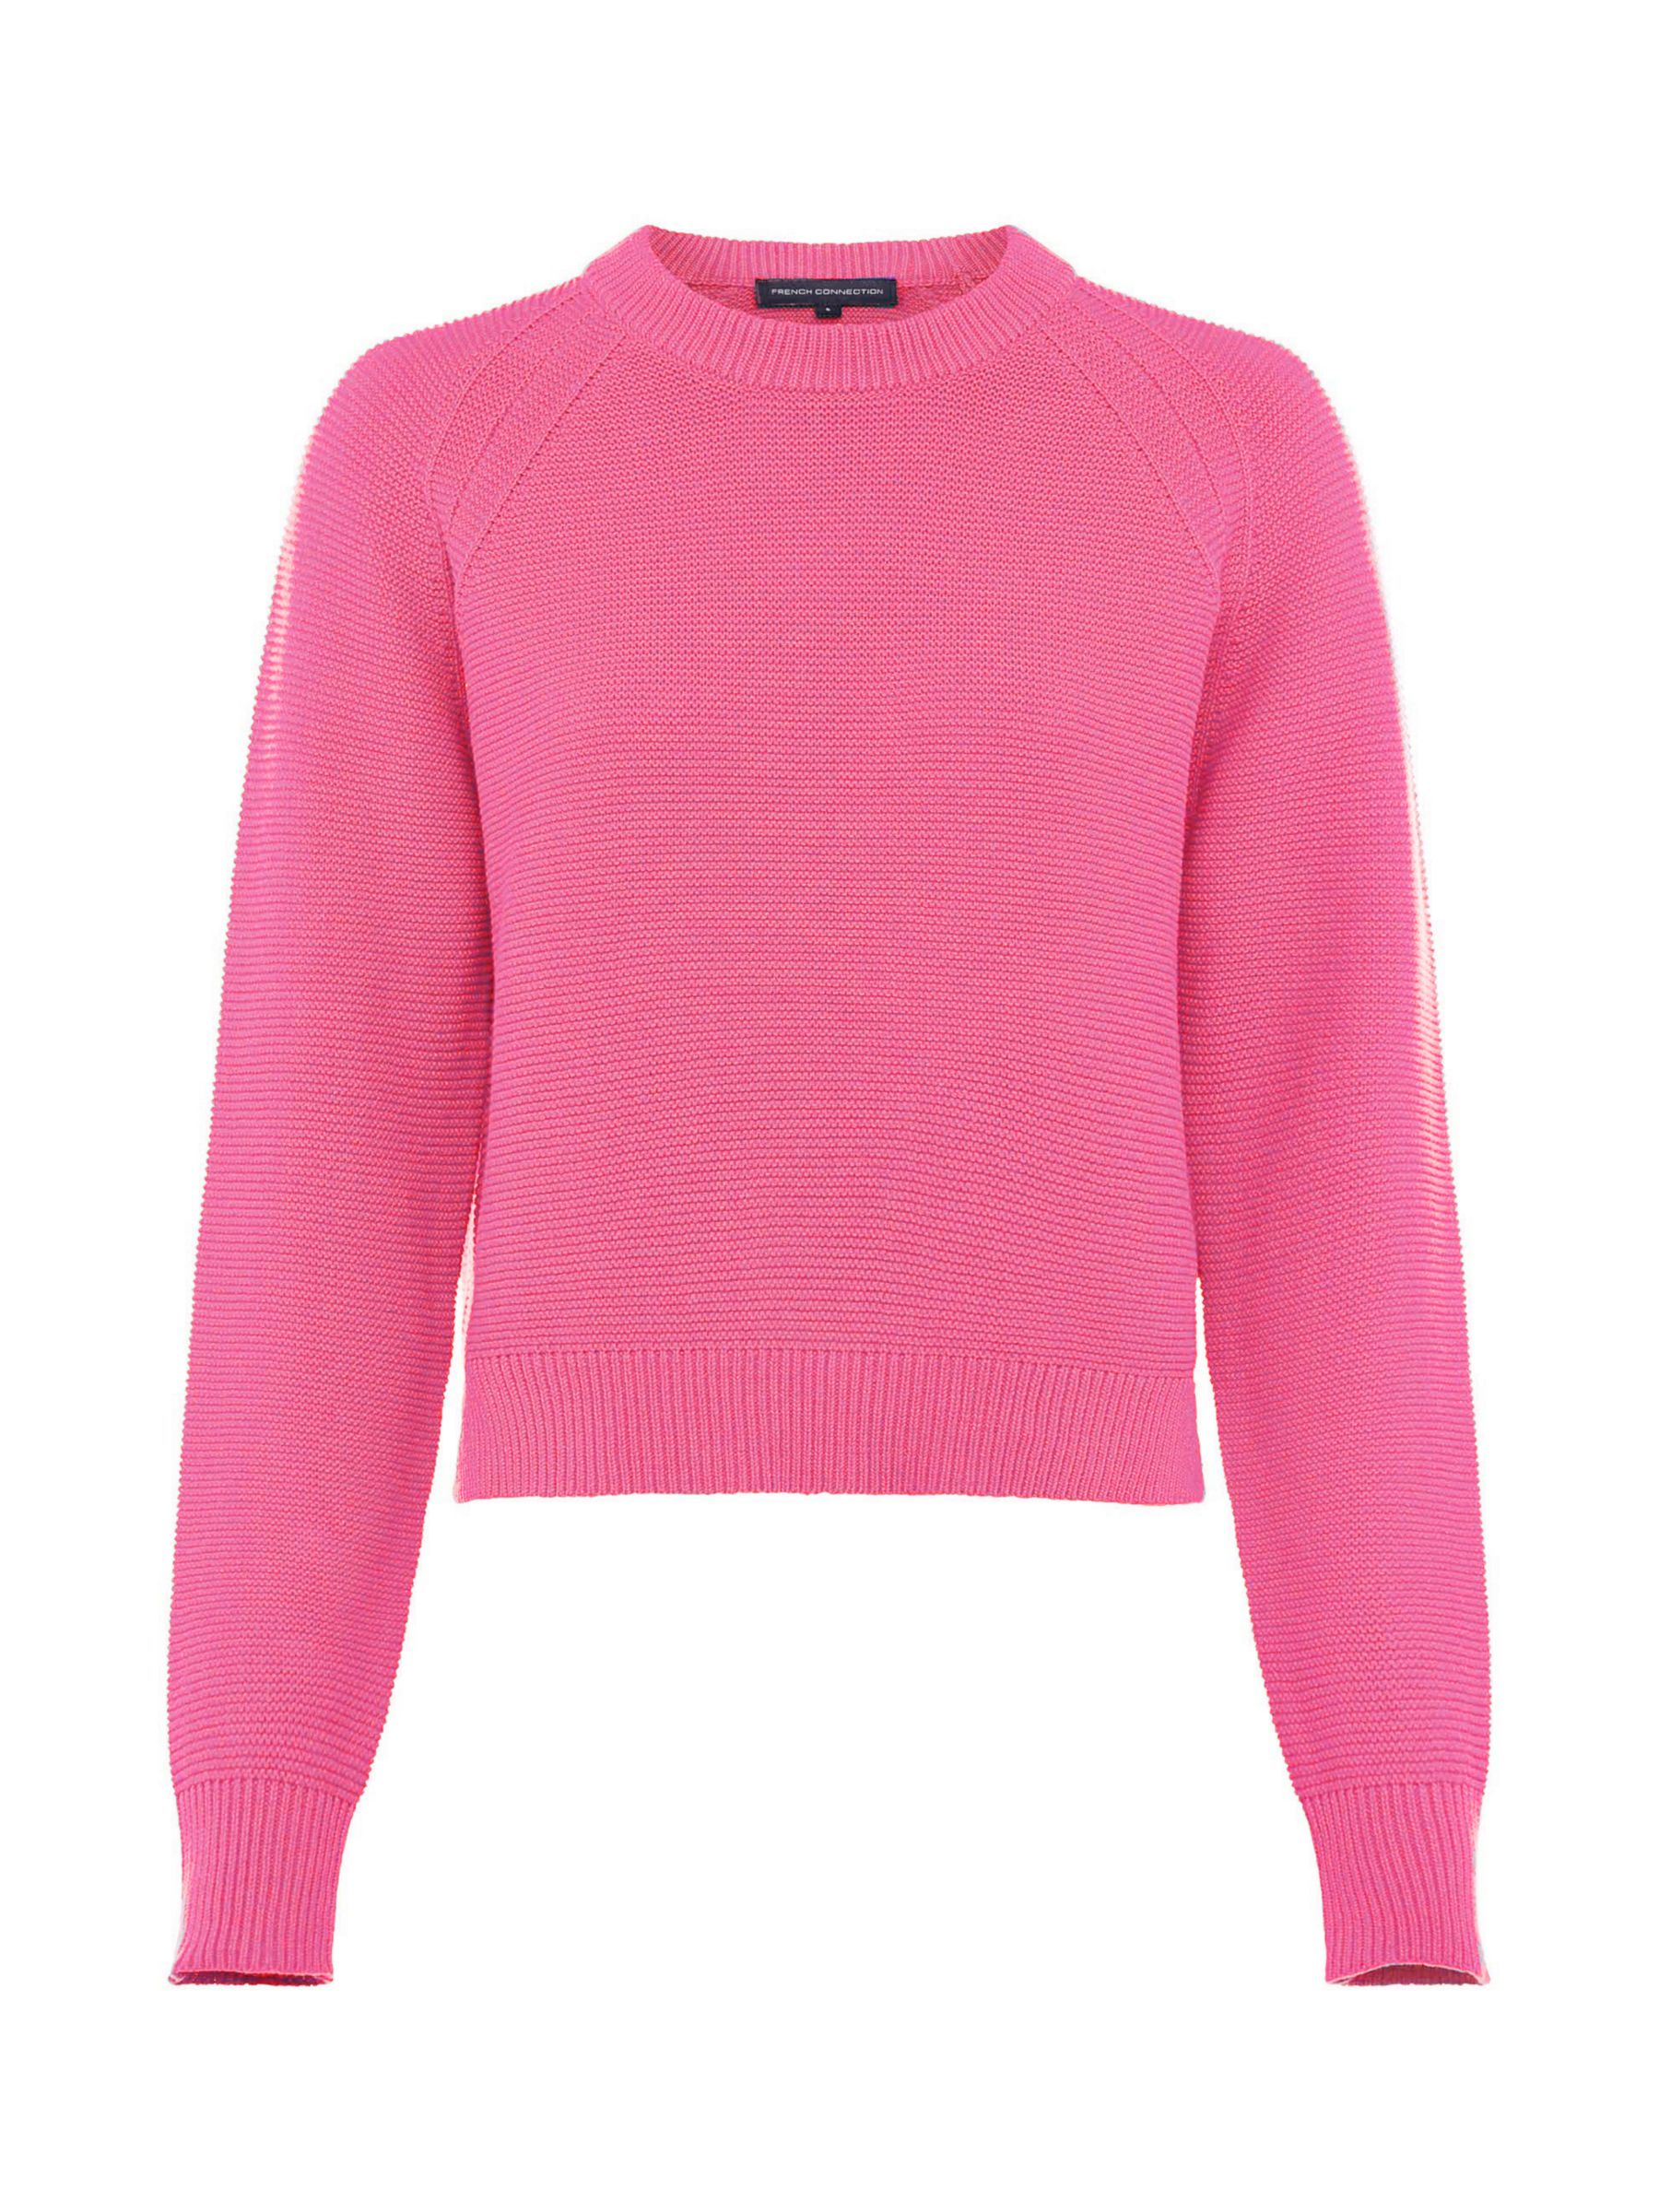 French Connection Lilly Mozart Crew Jumper, Bubblegum at John Lewis ...